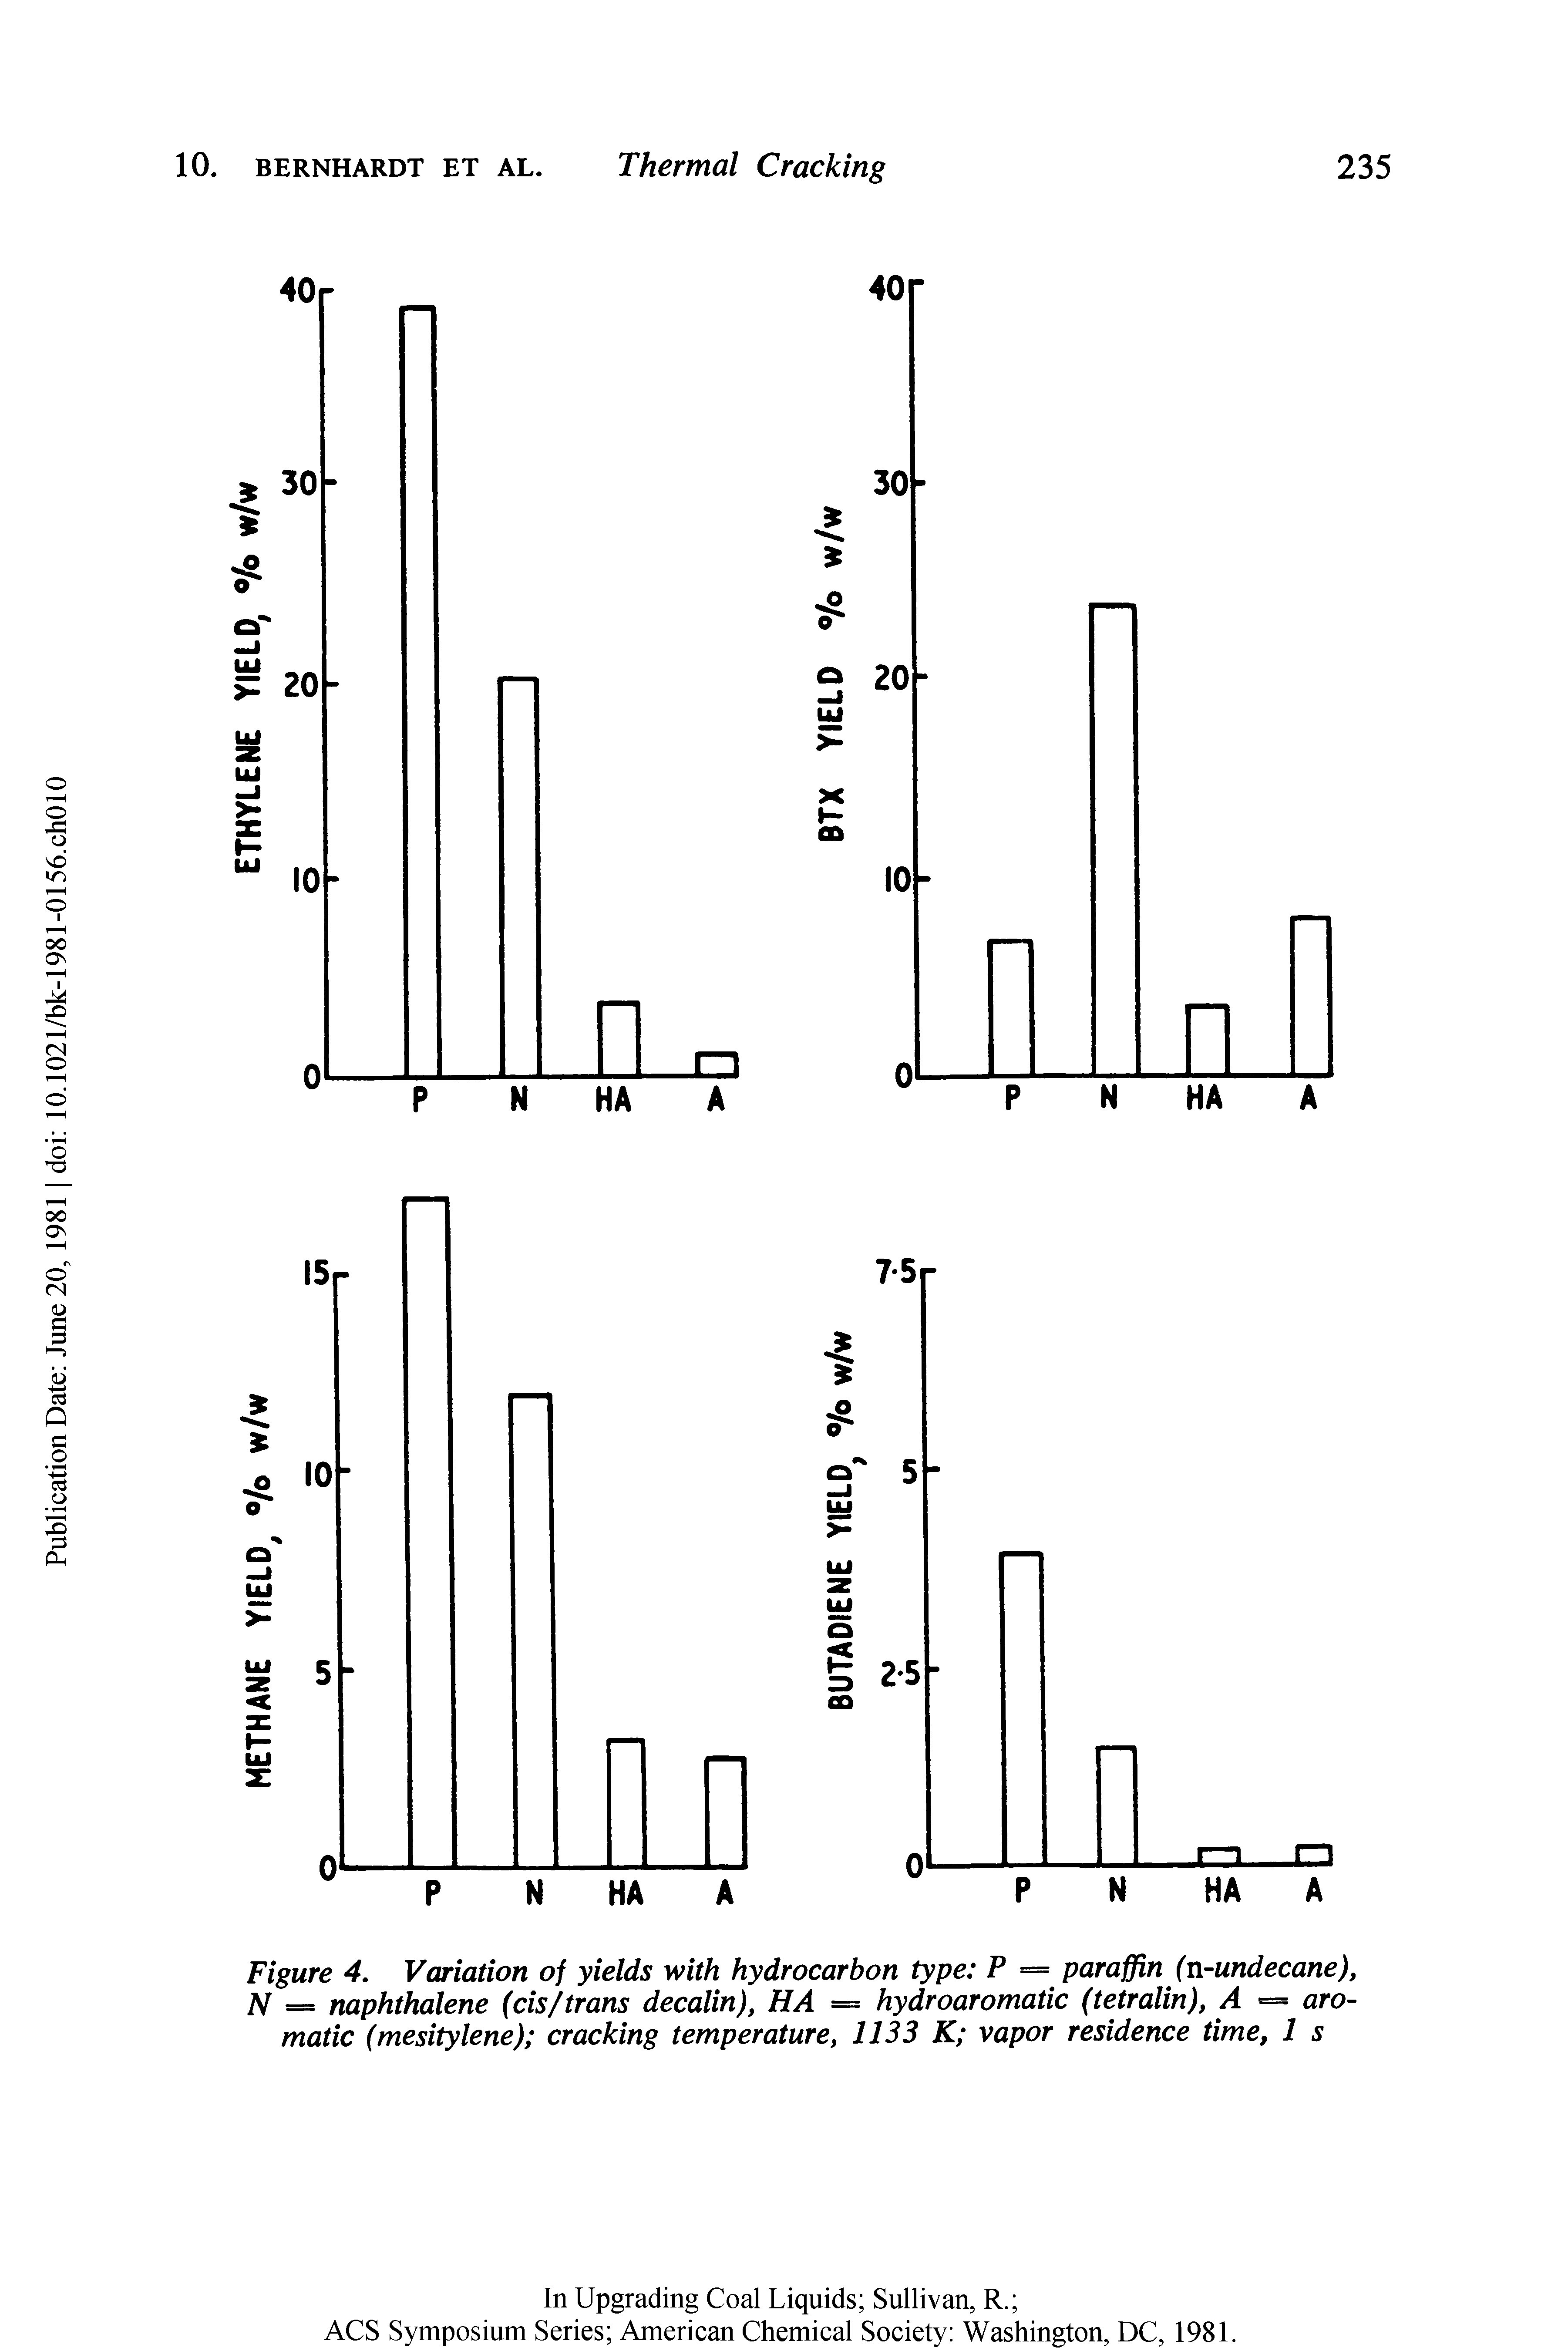 Figure 4. Variation of yields with hydrocarbon type P = paraffin (n-undecane), N = naphthalene (cis/trans decalin), HA = hydroaromatic (tetralin), A = aromatic (mesitylene) cracking temperature, 1133 K vapor residence time, 1 s...